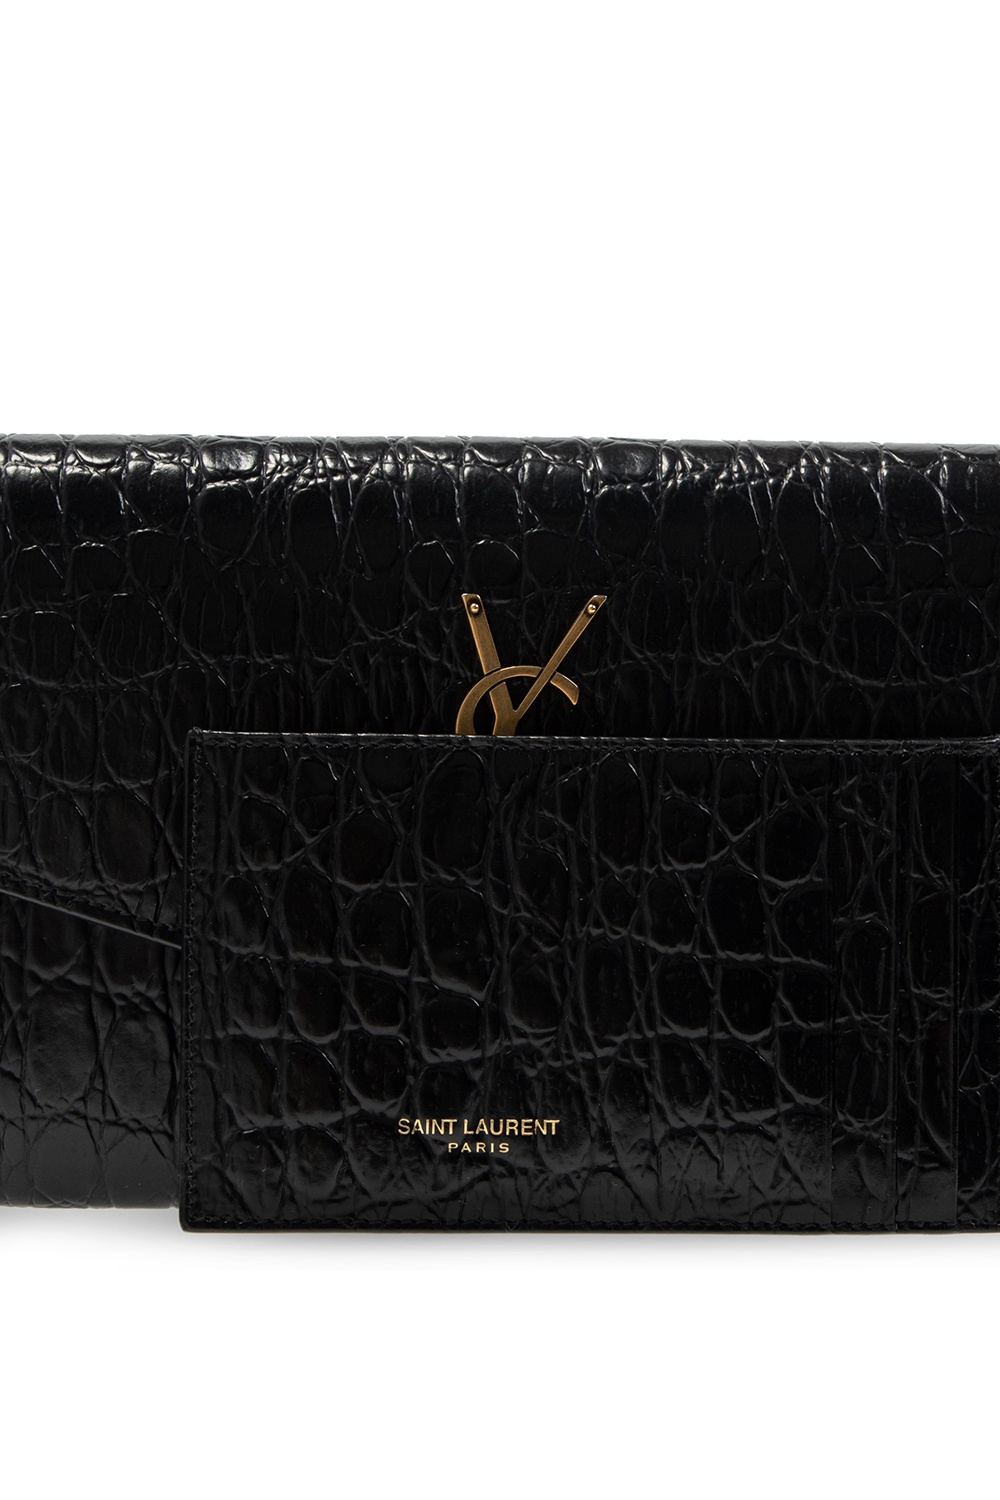 Saint Laurent Uptown Croc-effect Patent-leather Pouch - Red - One Size